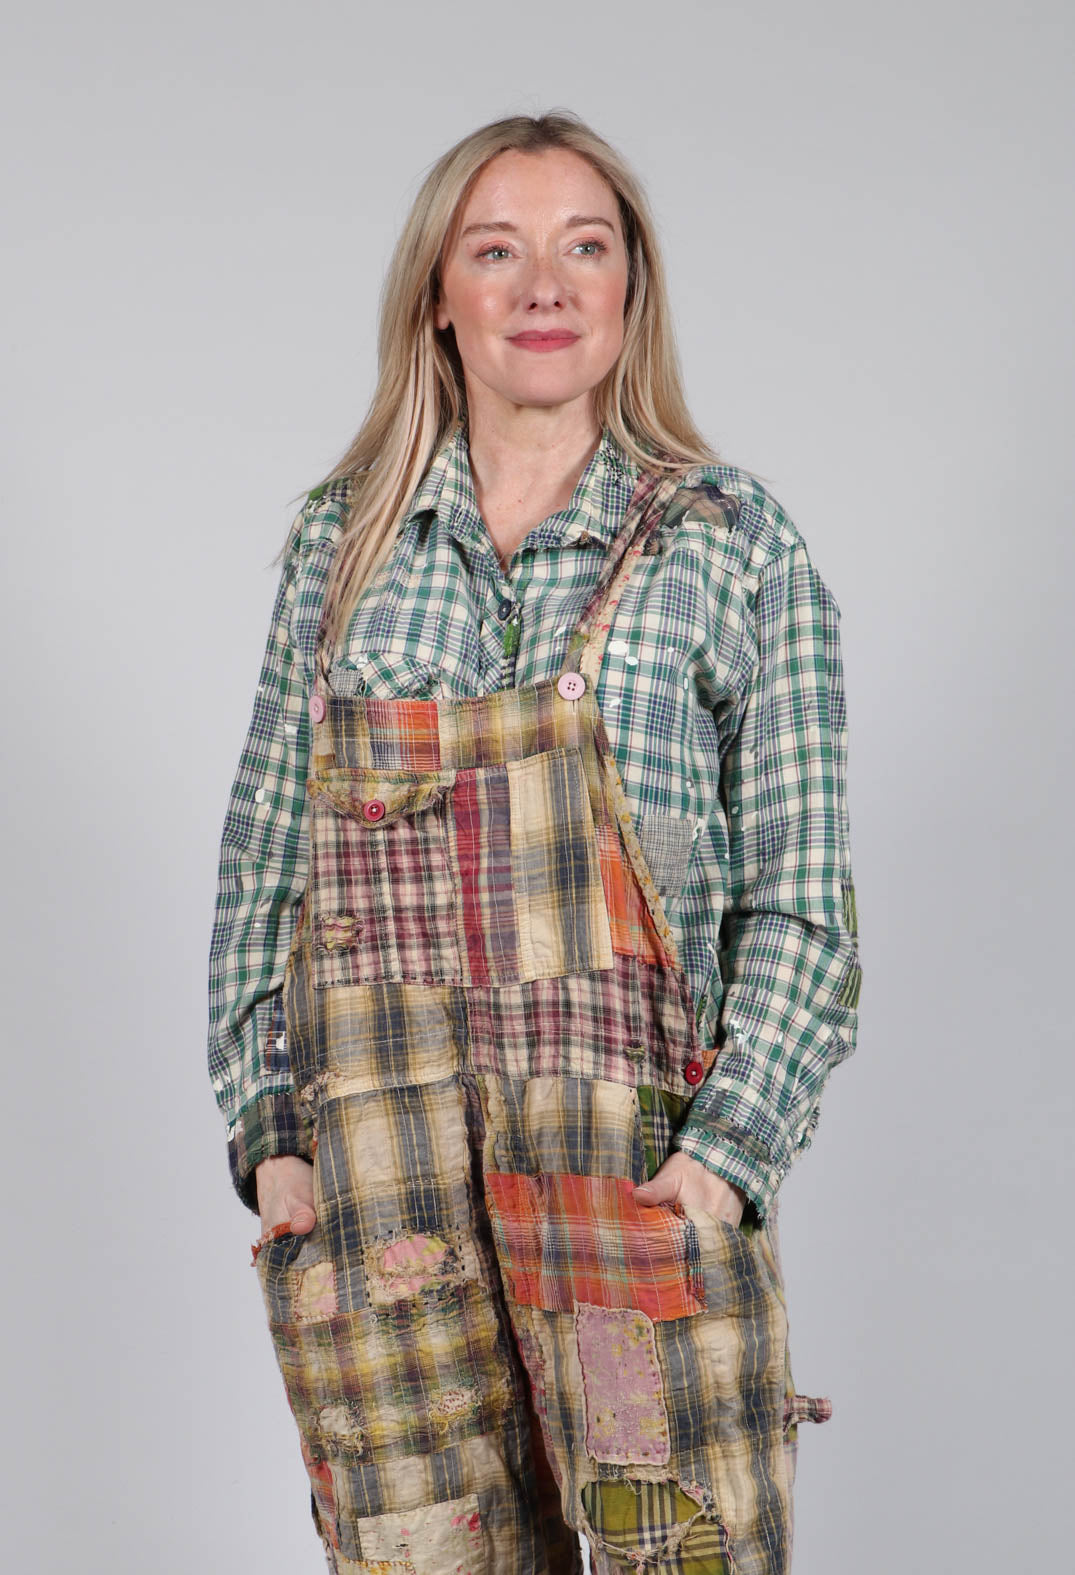 YD Patchwork Love Overalls in Madras Green